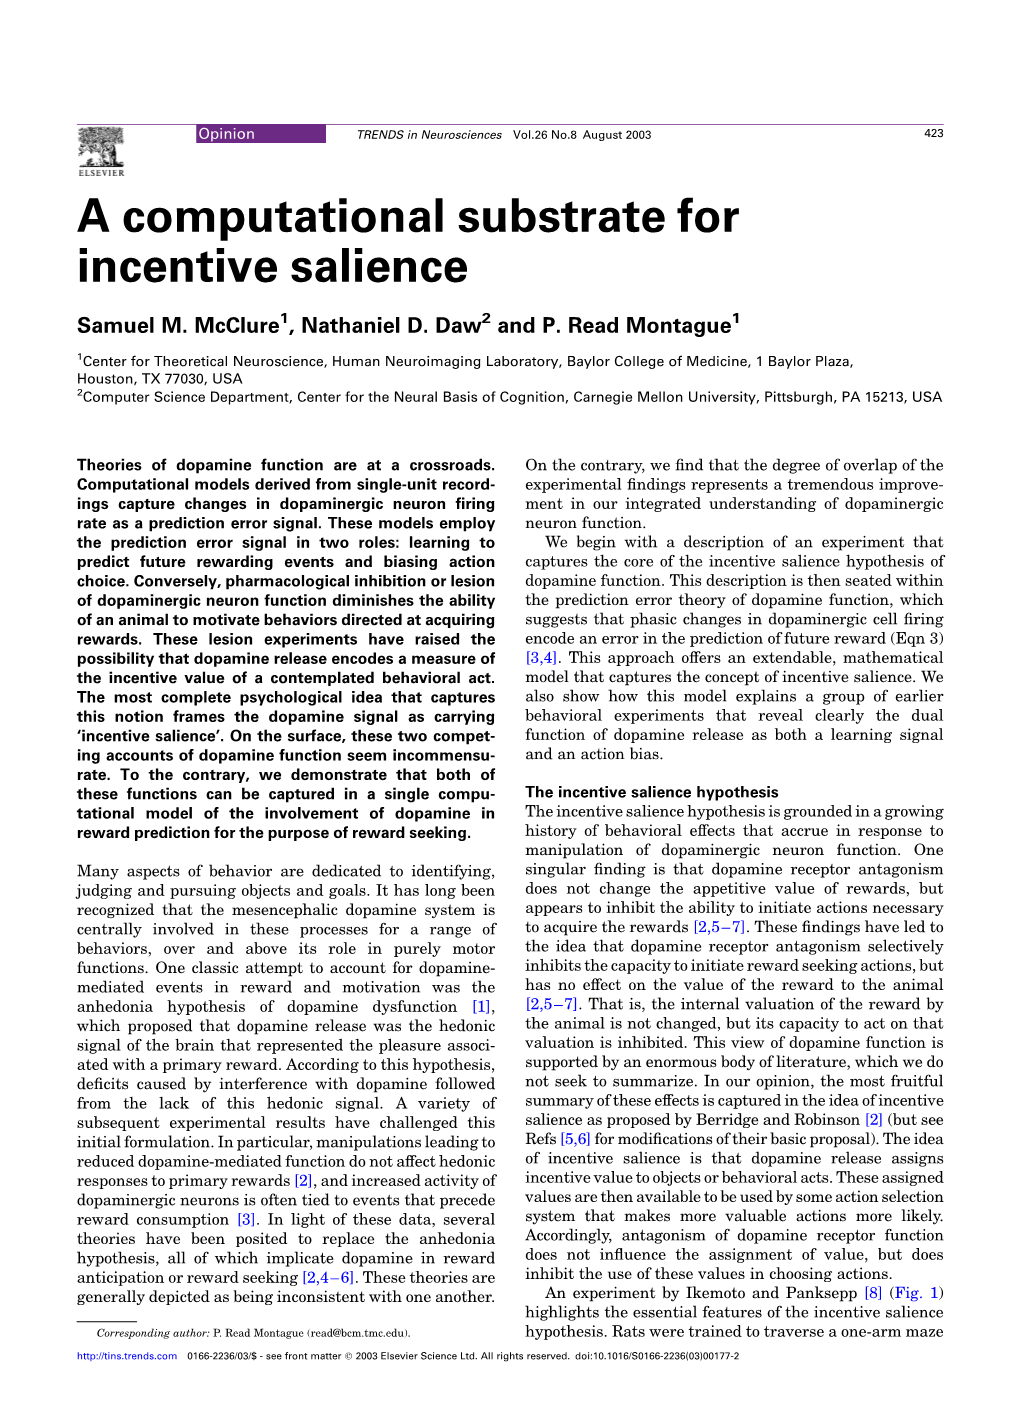 A Computational Substrate for Incentive Salience